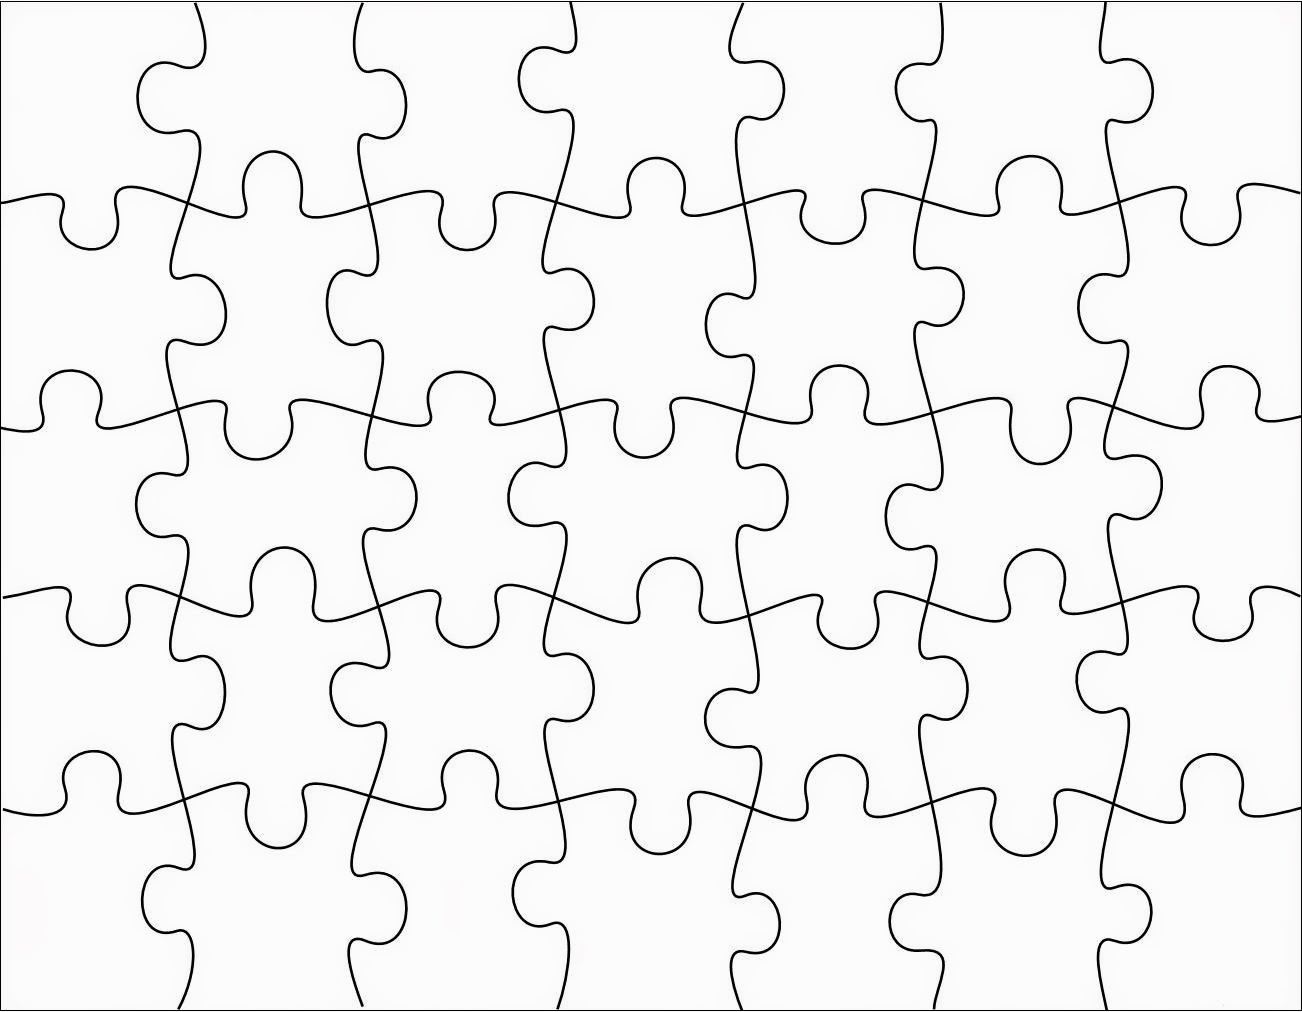 jigsaw puzzle maker online free download